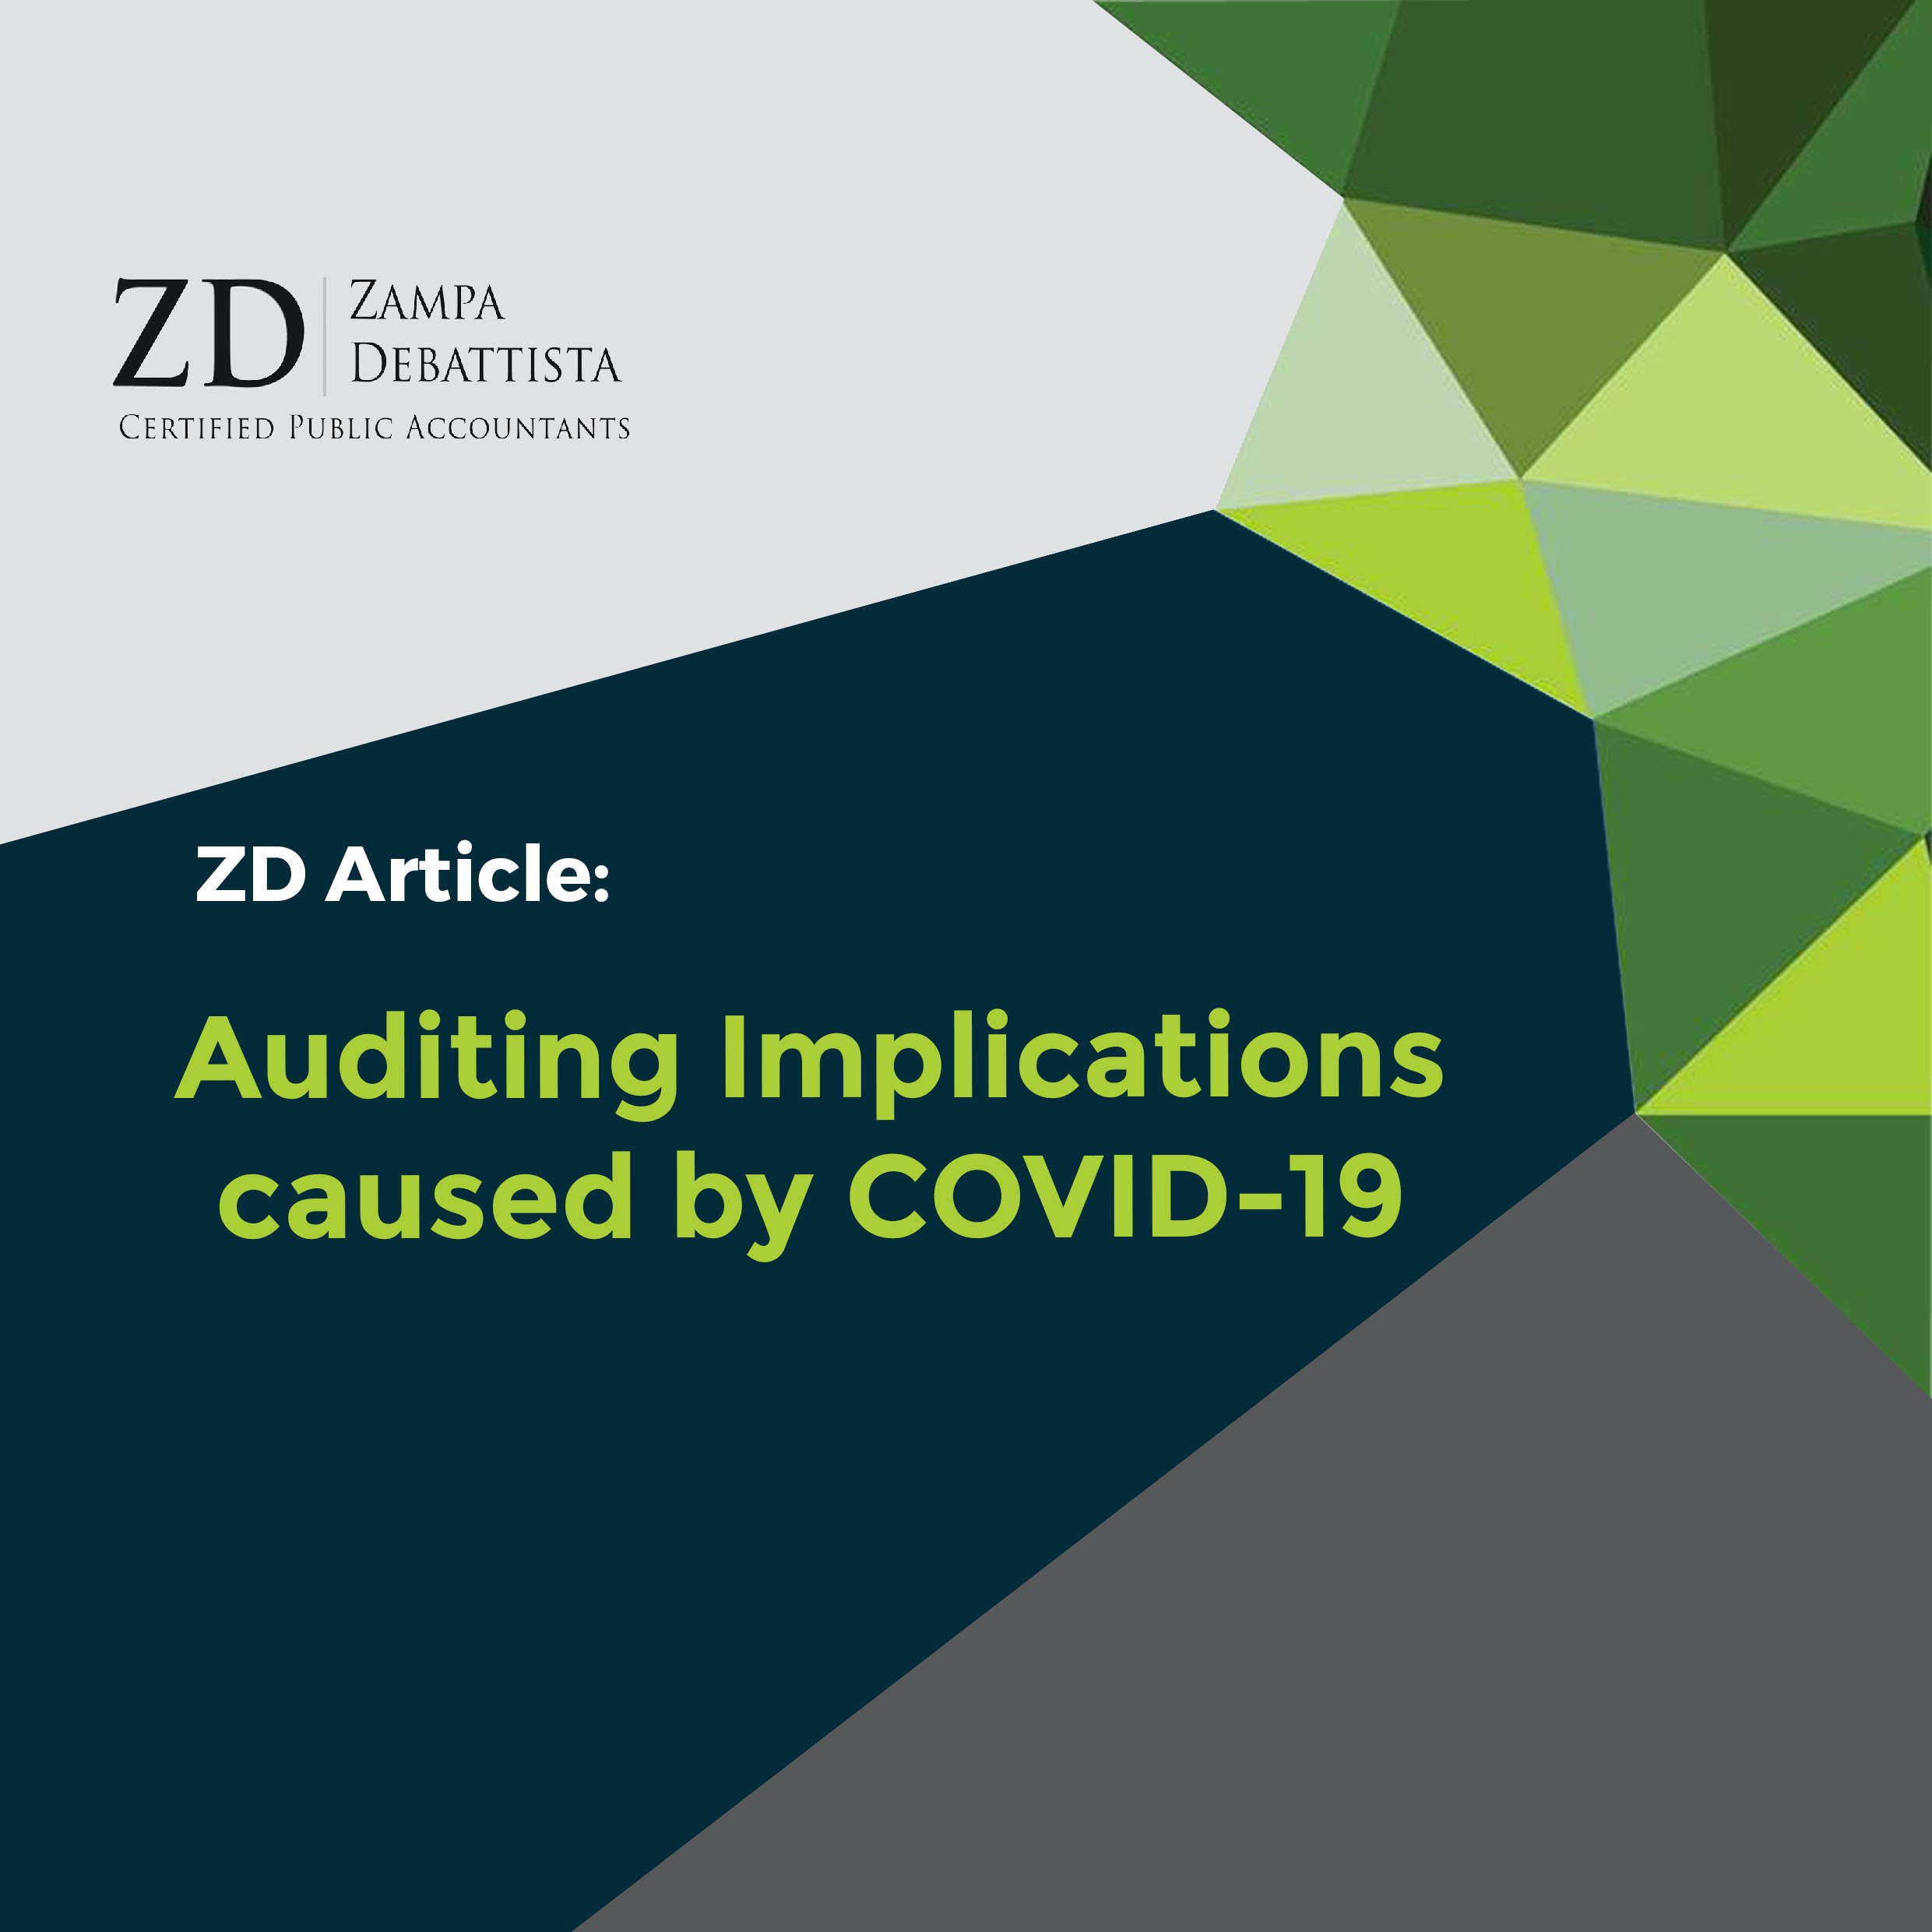 Auditing implications caused by COVID-19